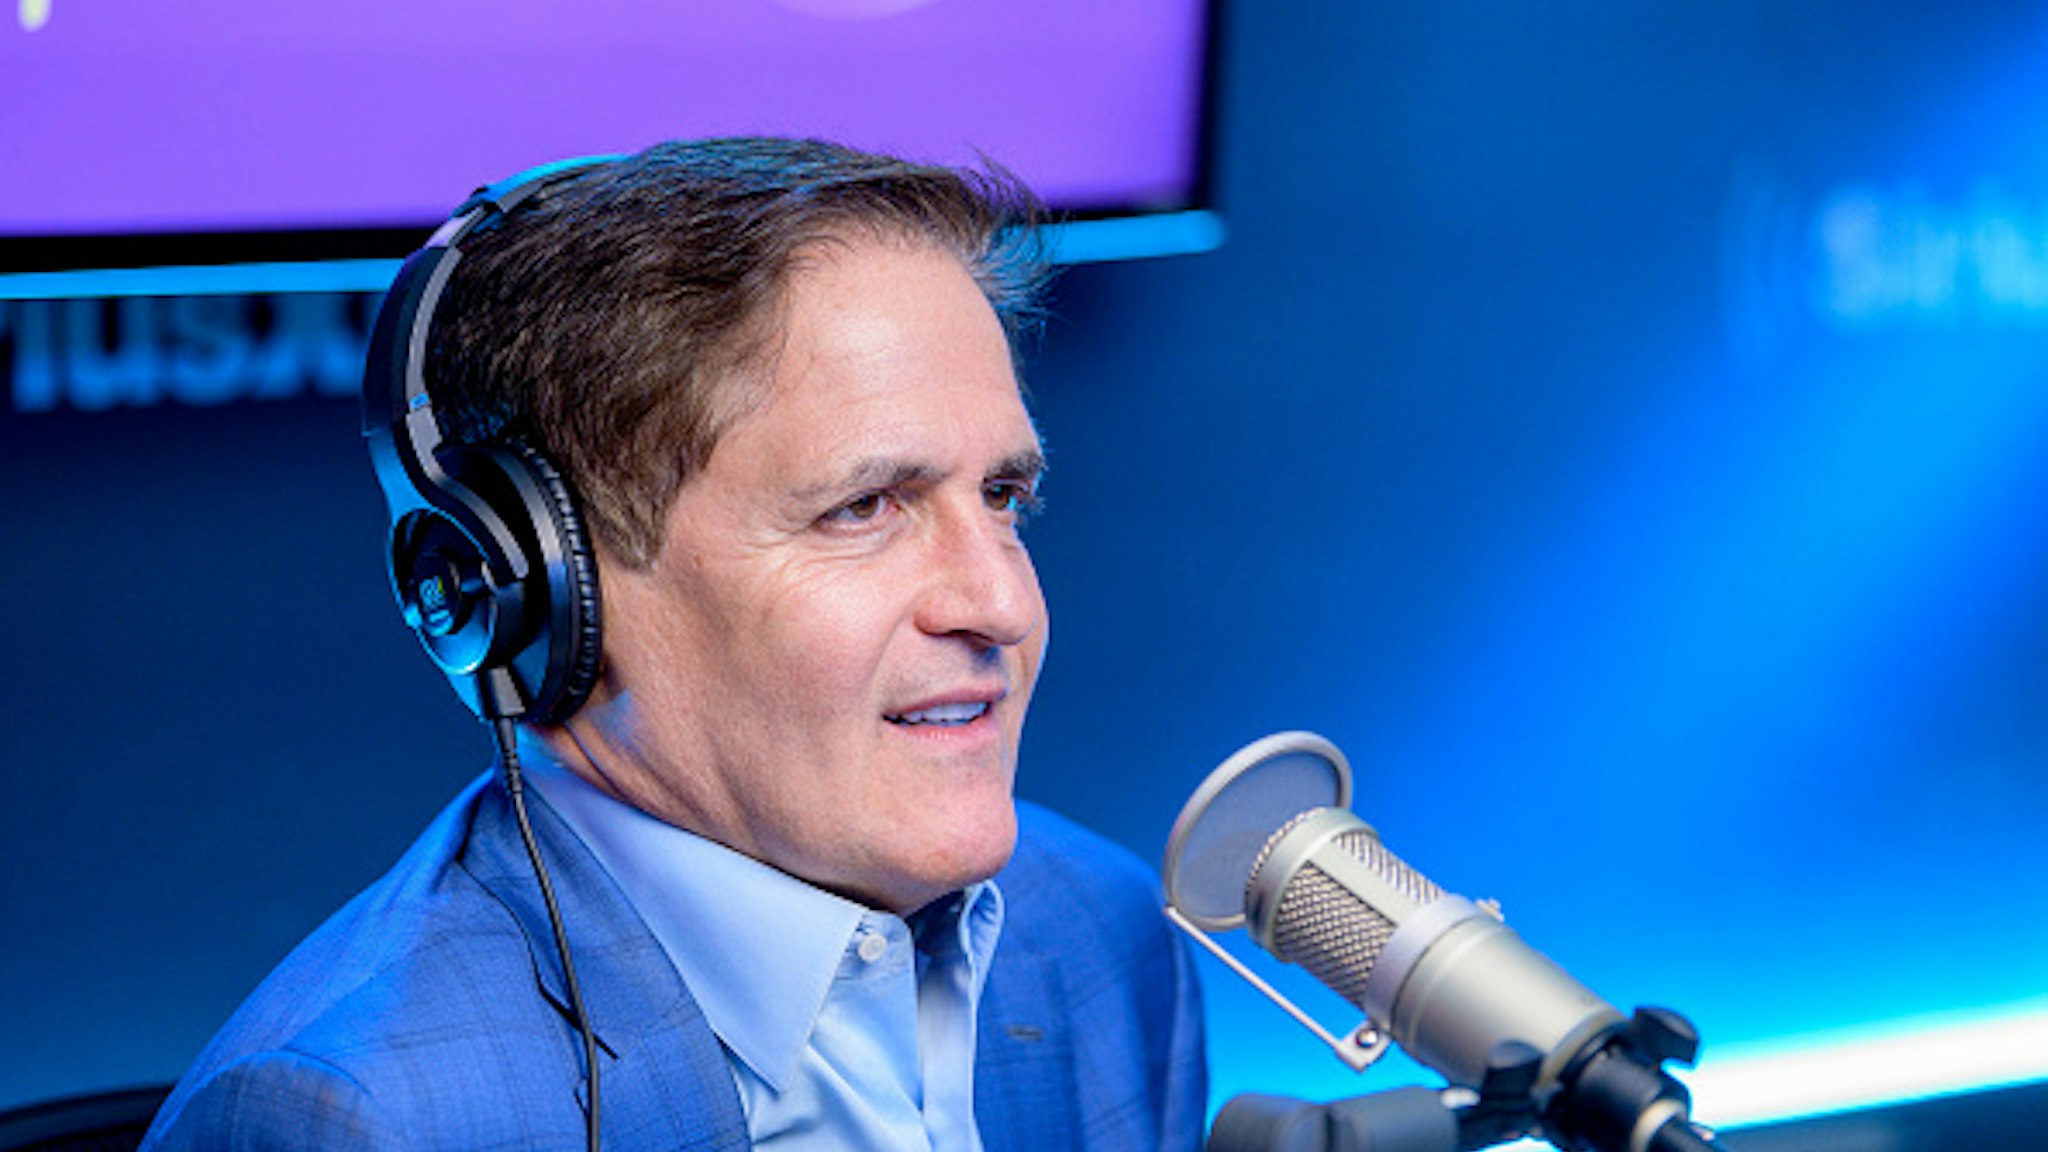 NEW YORK, NEW YORK - FEBRUARY 25: (EXCLUSIVE COVERAGE) Mark Cuban visits "Heather B Live" with host Heather B. Gardner at SiriusXM Studios on February 25, 2020 in New York City.